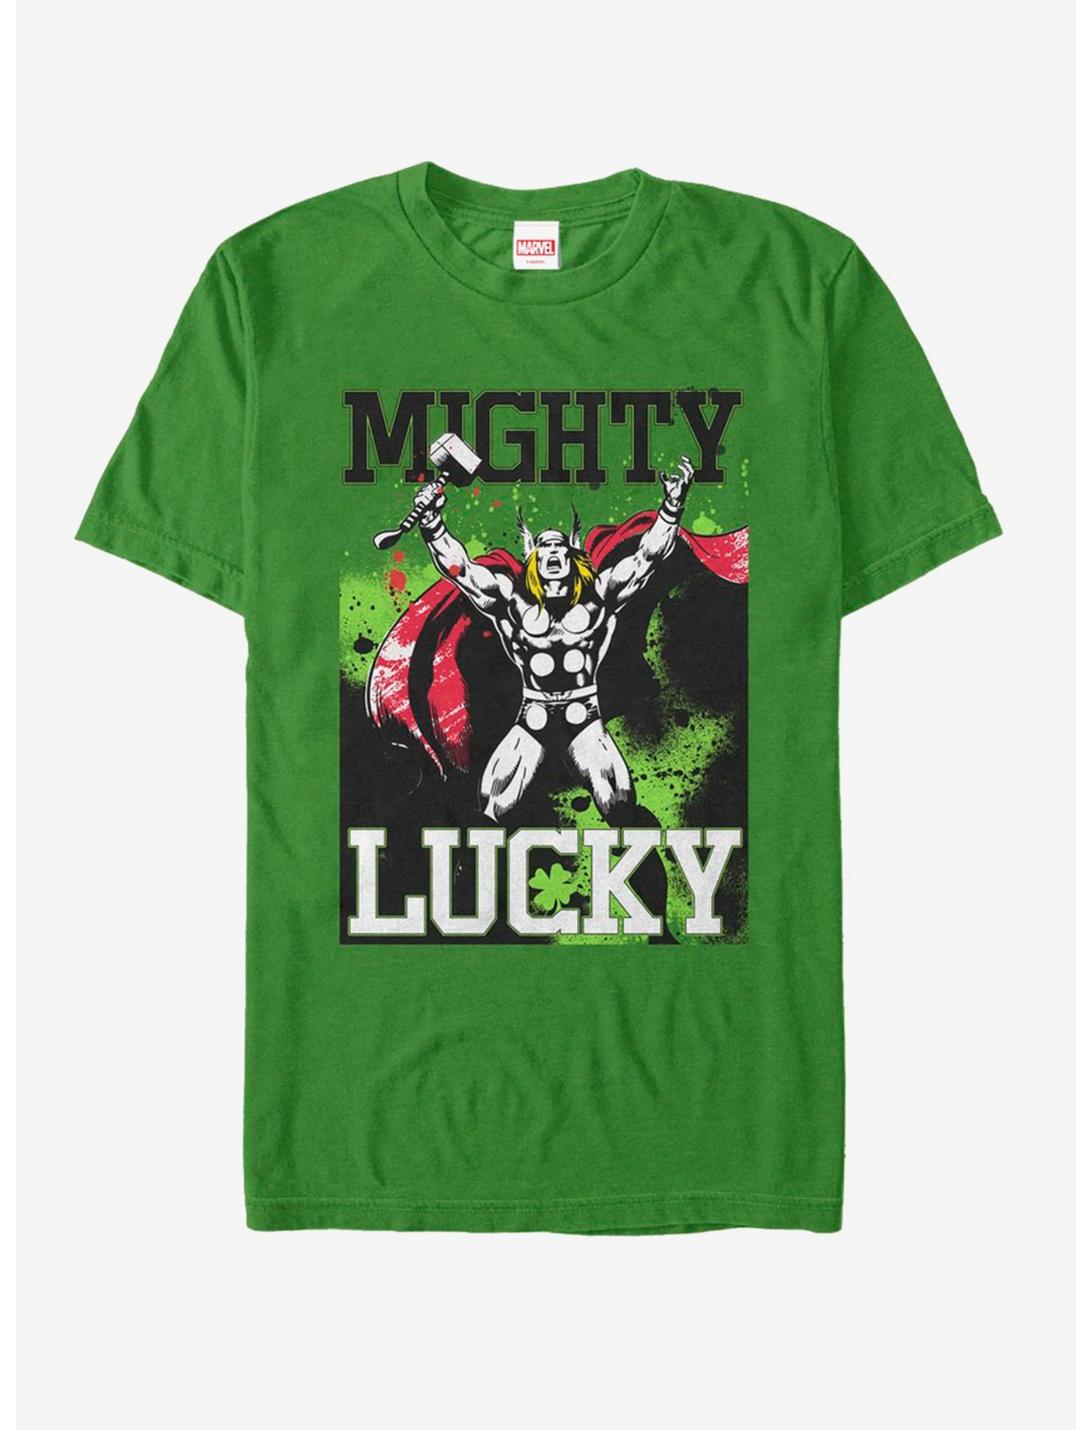 Marvel Thor Mighty Luck T-Shirt, KELLY, hi-res